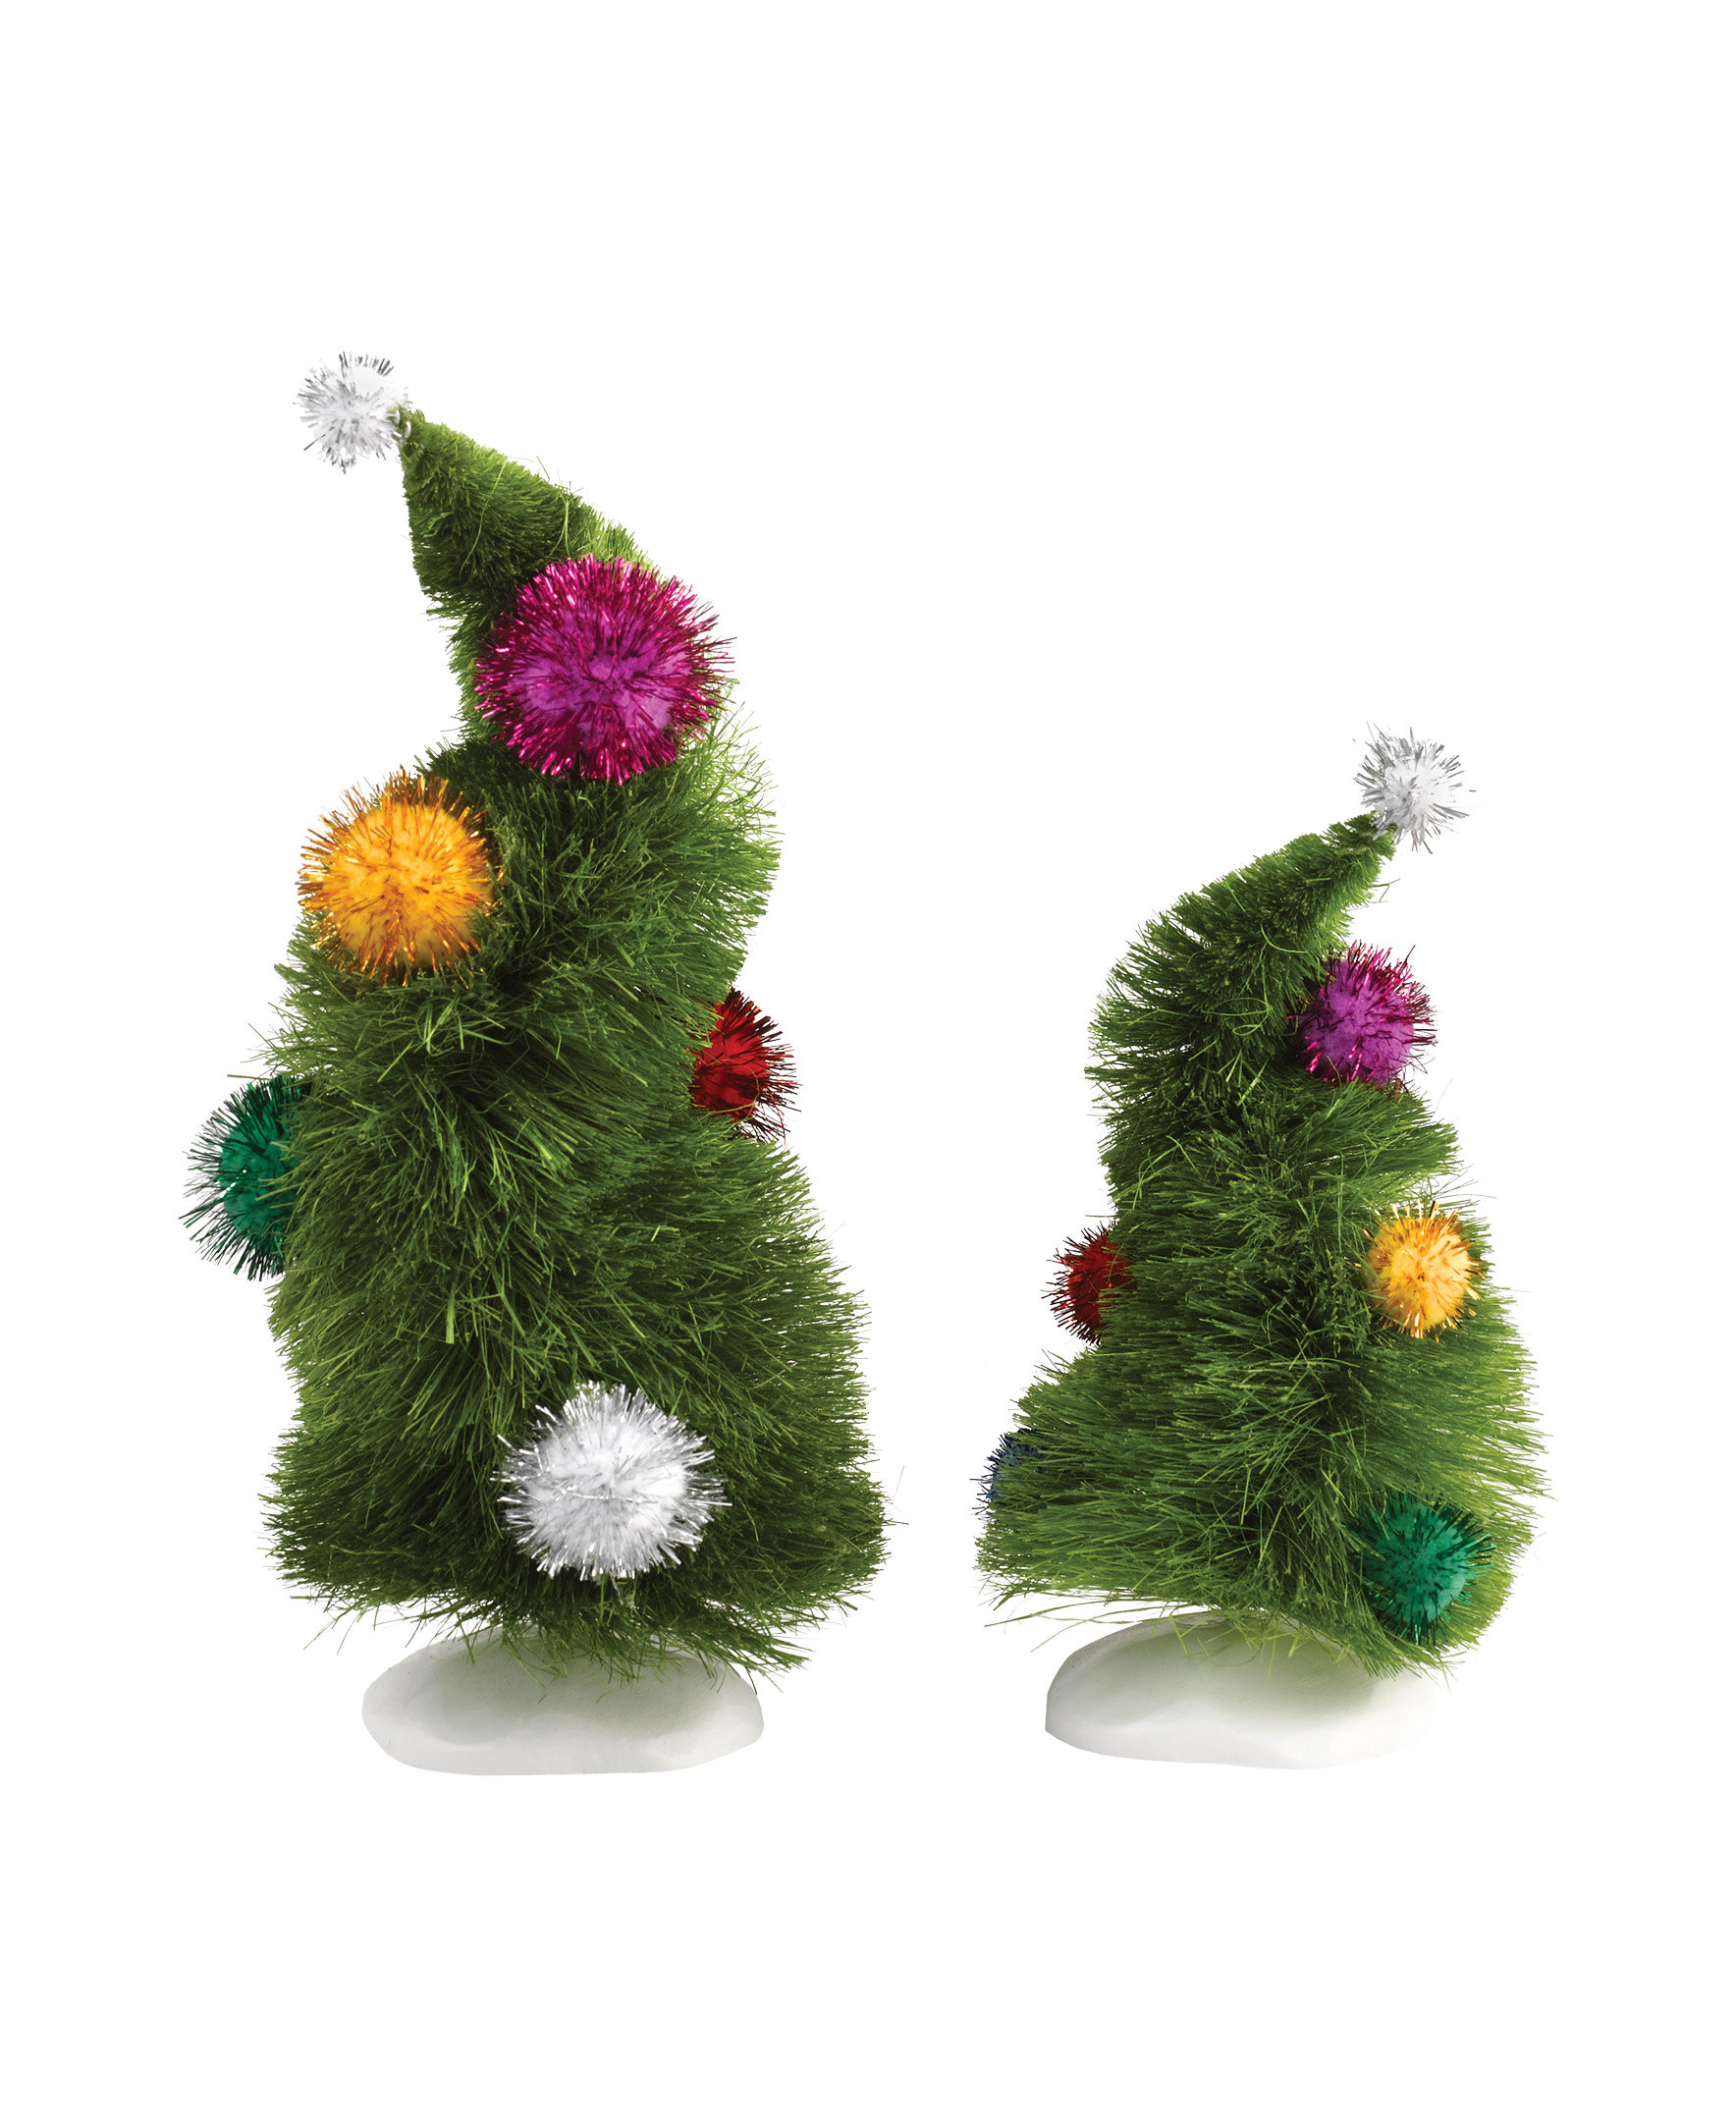 Dr. Seuss The Grinch Legs Christmas Tree Accessory, 3 Ft 